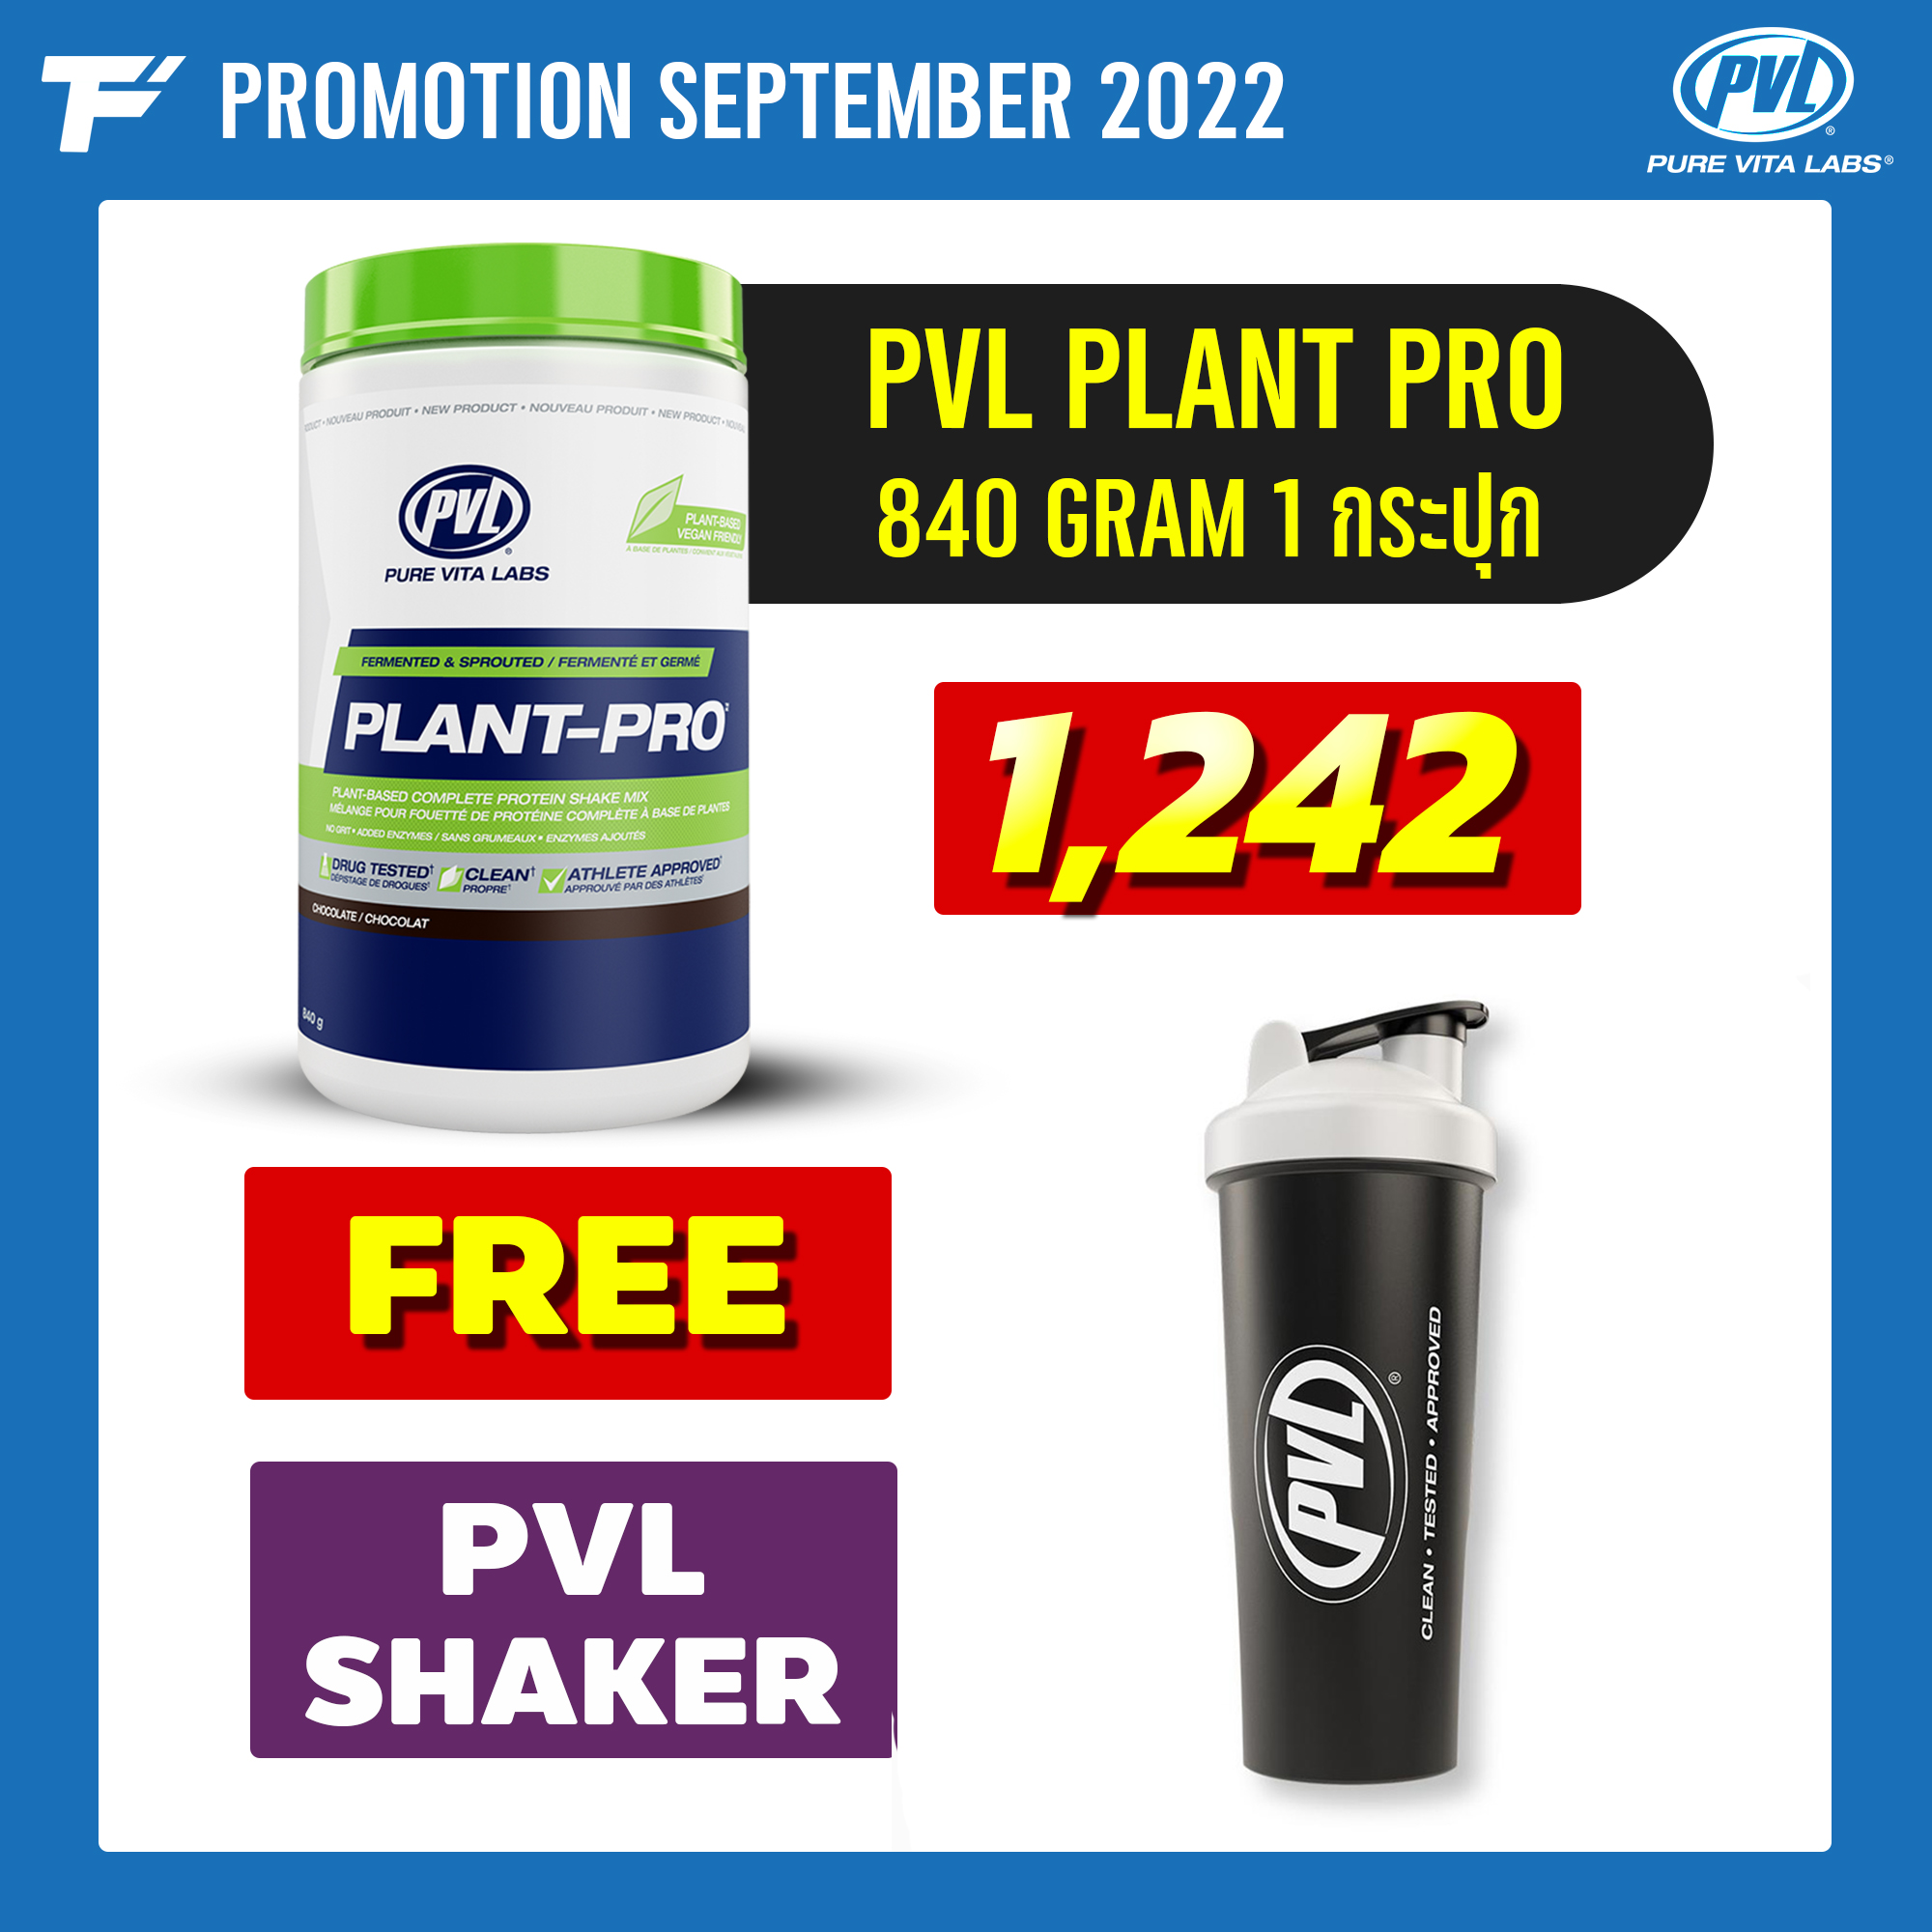 PVL Plant-Pro 840 g. 100% Plant Protein 2 กระปุก Free PVL DELUXE SHAKER